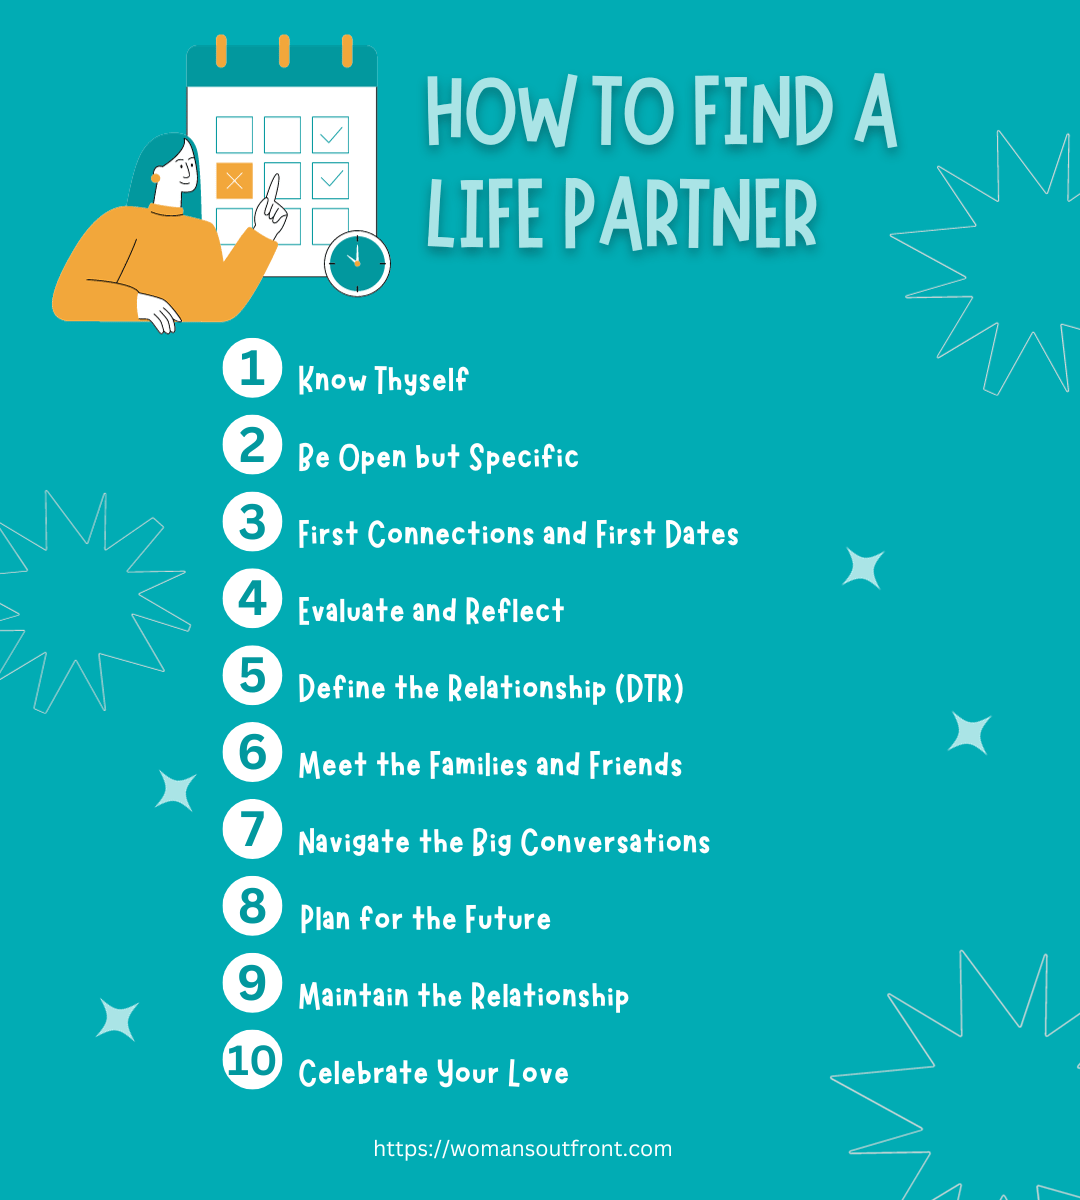 how to find a life partner infographic